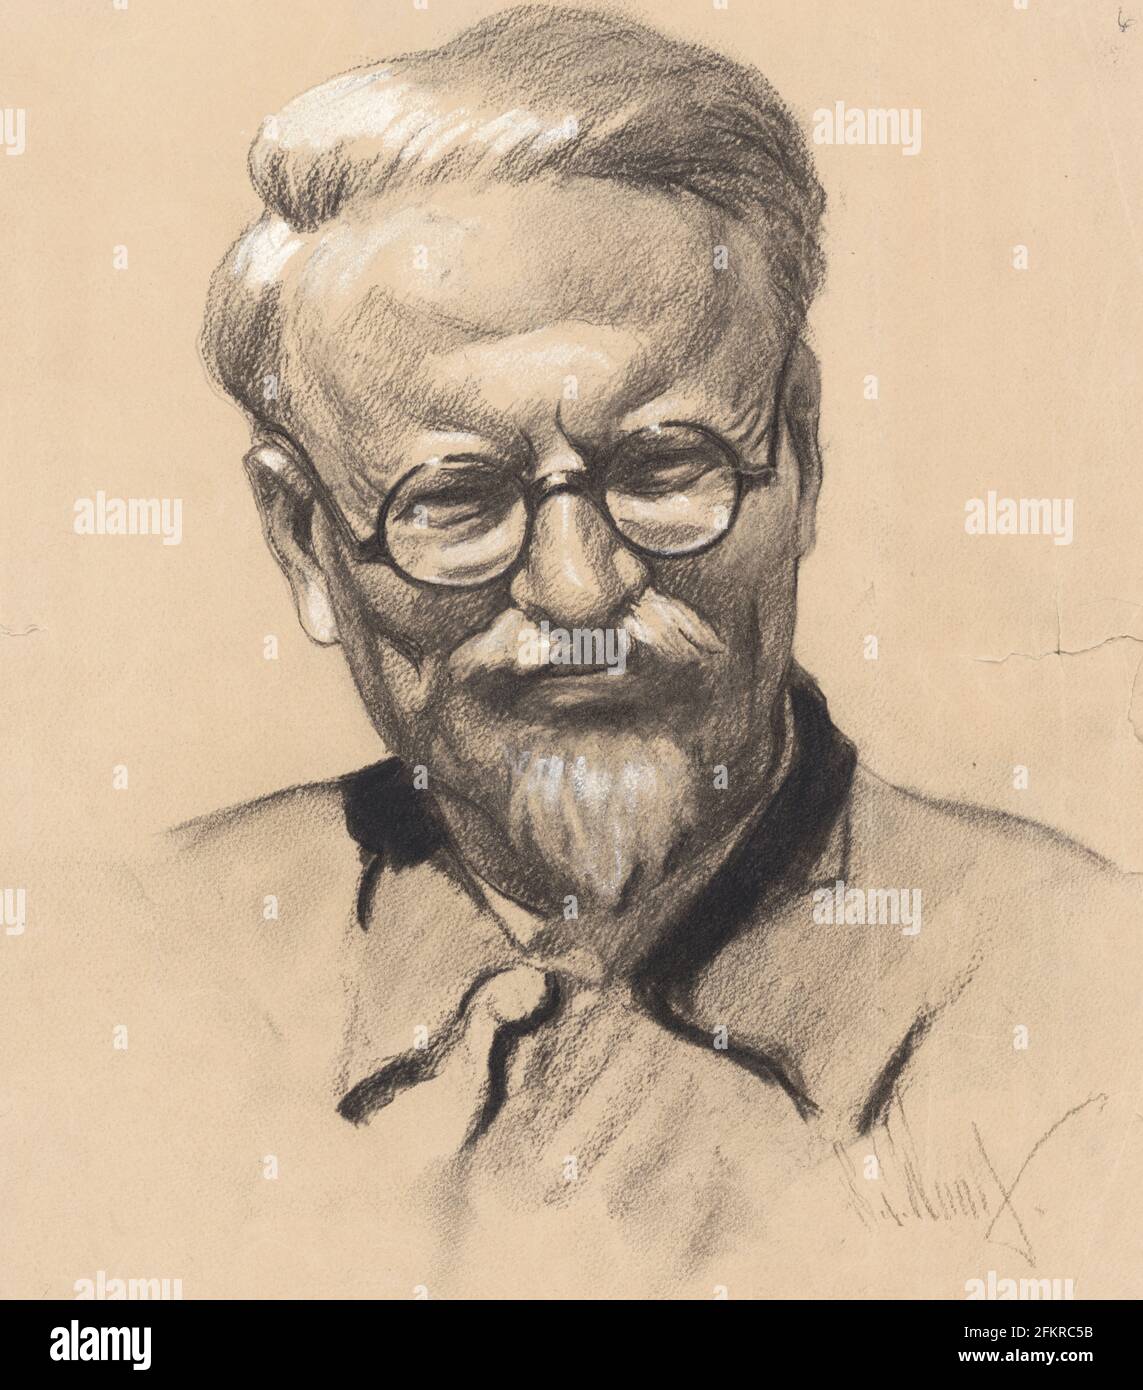 Charcoal and chalk drawing Drawing of Leon Trotsky by Samuel Johnson Woolf. This image appeared on the cover of TIME magazine, January 25, 1937 Stock Photo